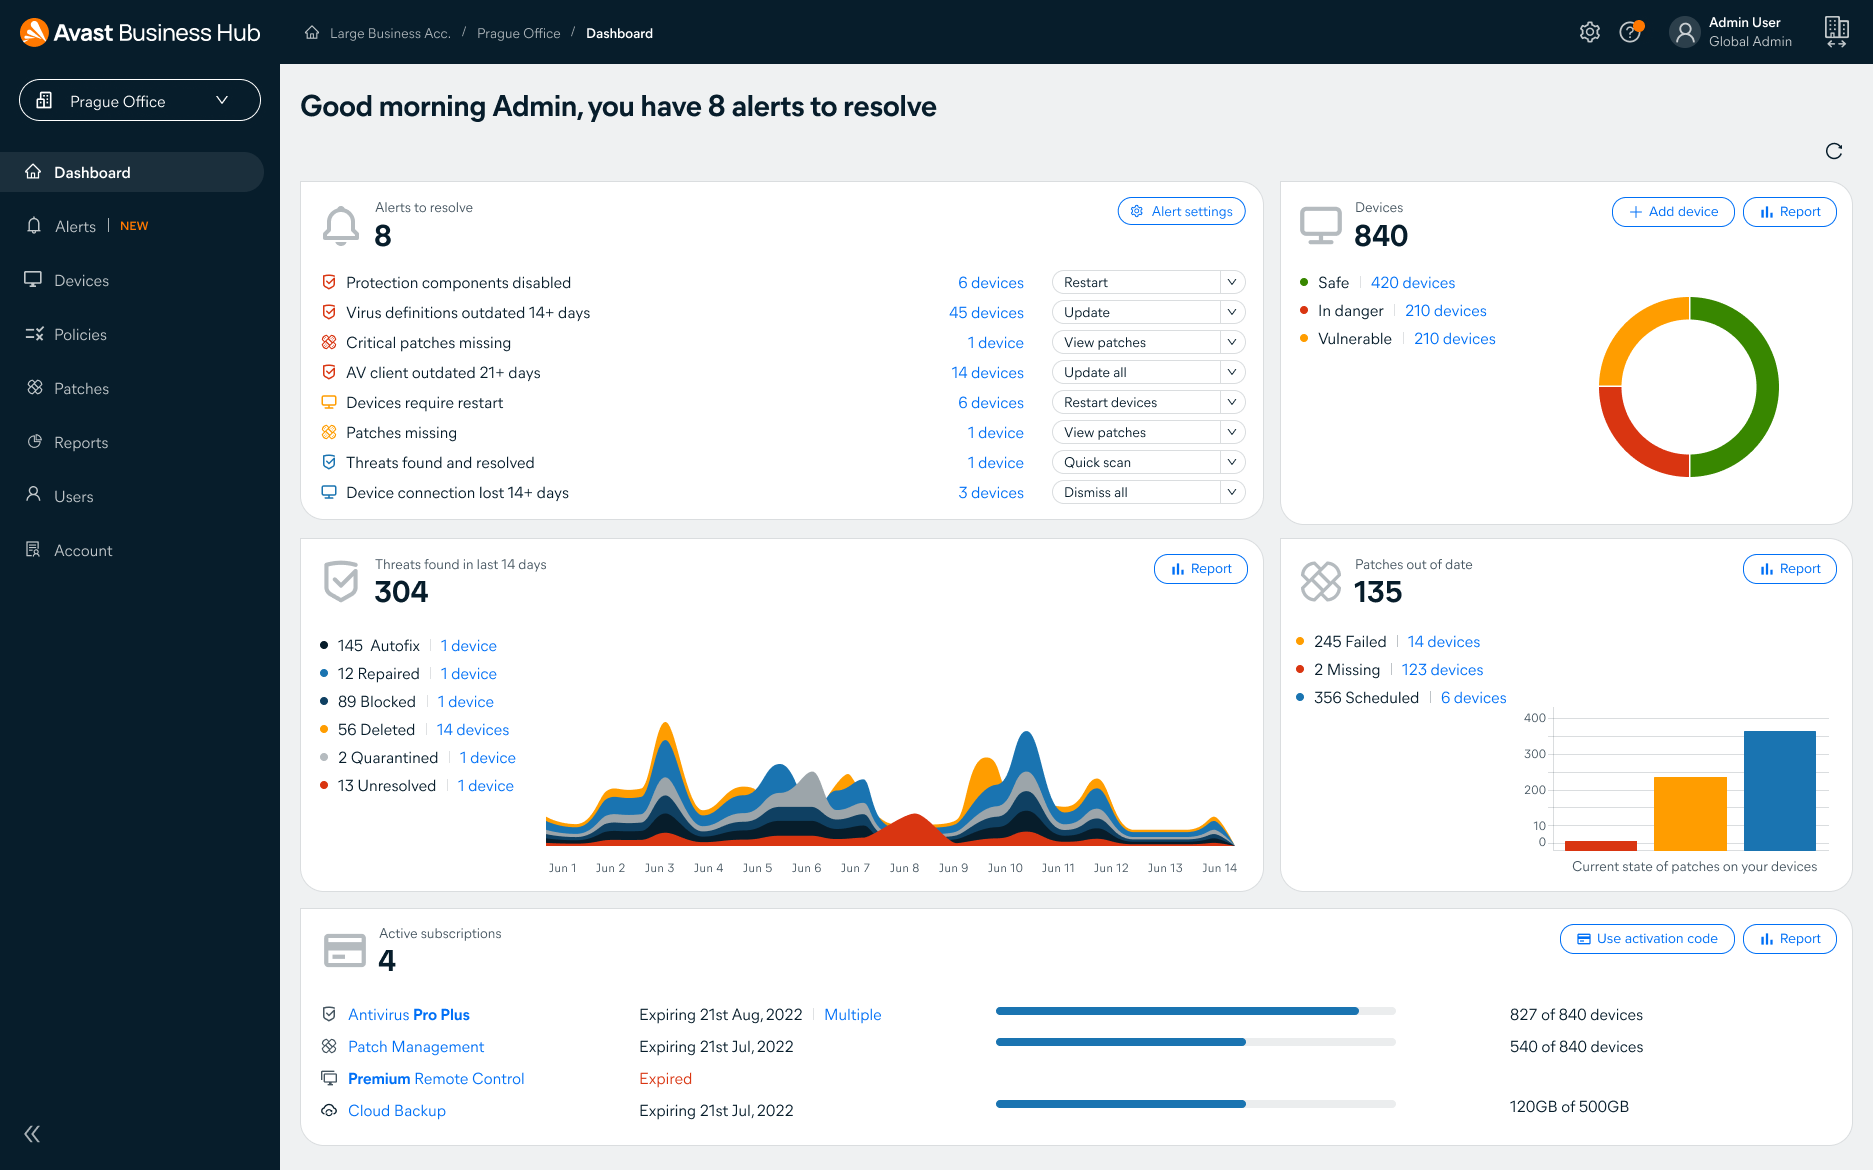 Easily manage all your Avast Business security solutions from one streamlined dashboard